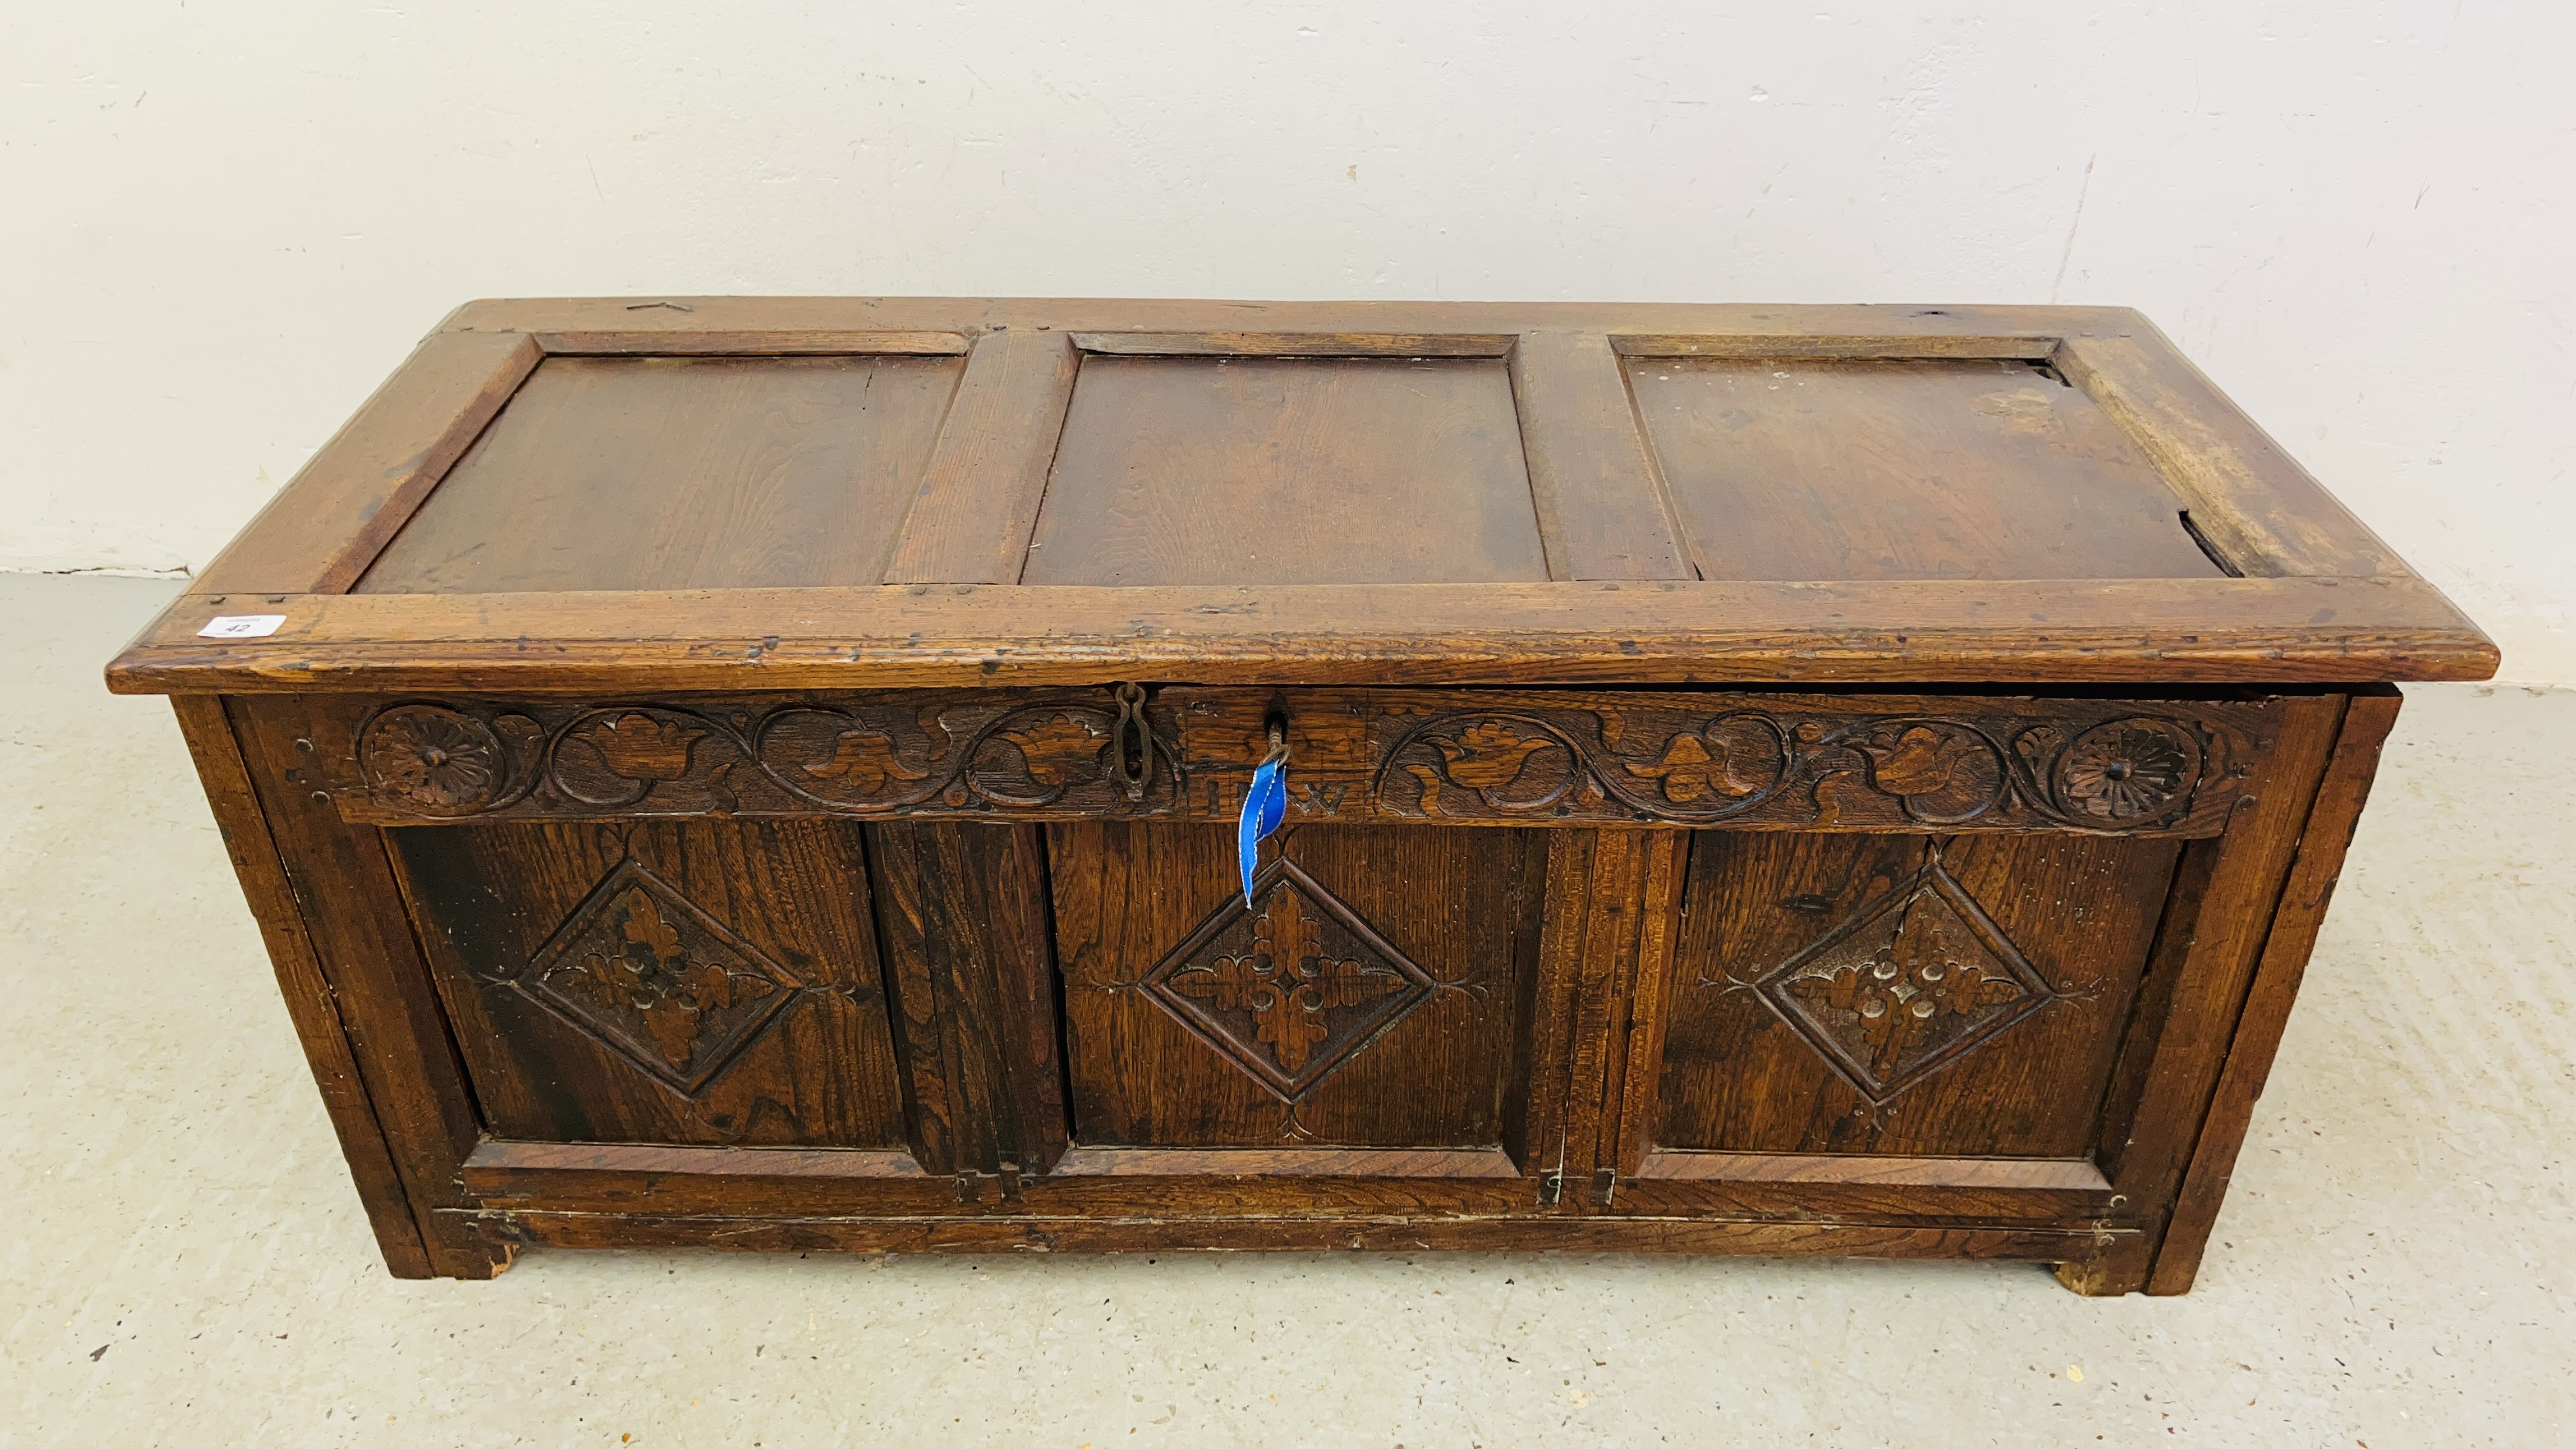 AN C18TH. ELM WOOD COFFER WITH CARVED PANEL DETAILING WIDTH 122CM. DEPTH 50CM. HEIGHT 49CM.